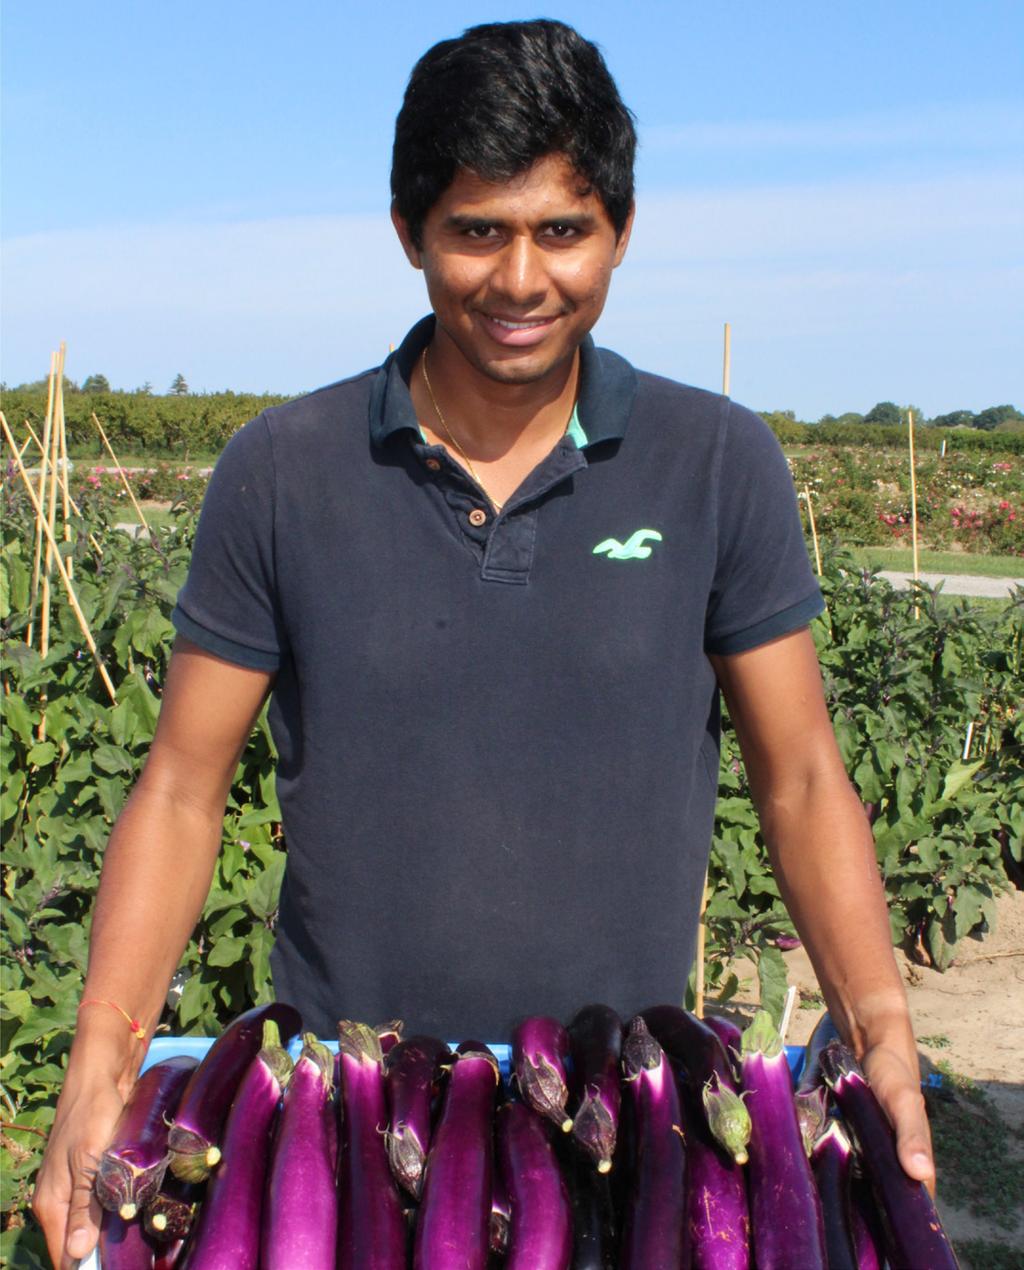 fertigation during hot summer months are important to achieve high production potential Short-season Asian okra varieties tested at Vineland show great promise Eggplant